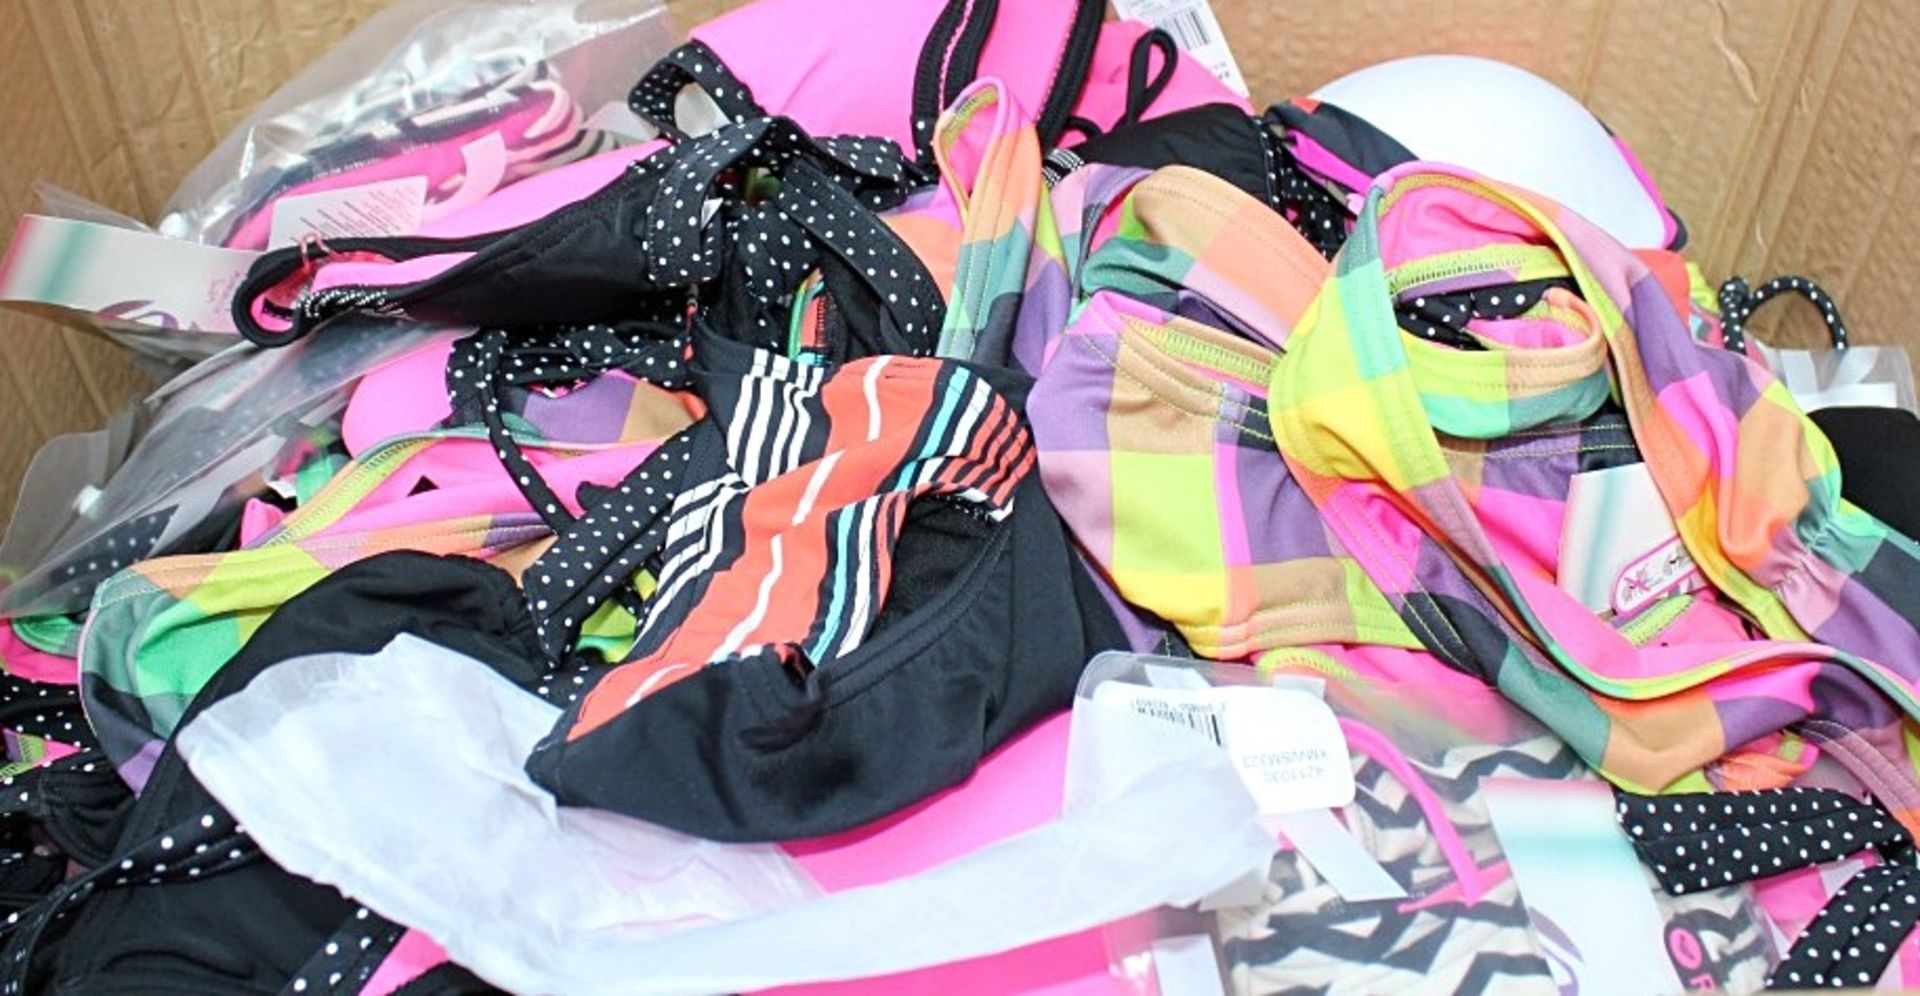 60 x Assorted ROXY Bikini Tops & Bottoms - Various Colours & Styles - Recent Retail Closure - - Image 2 of 4